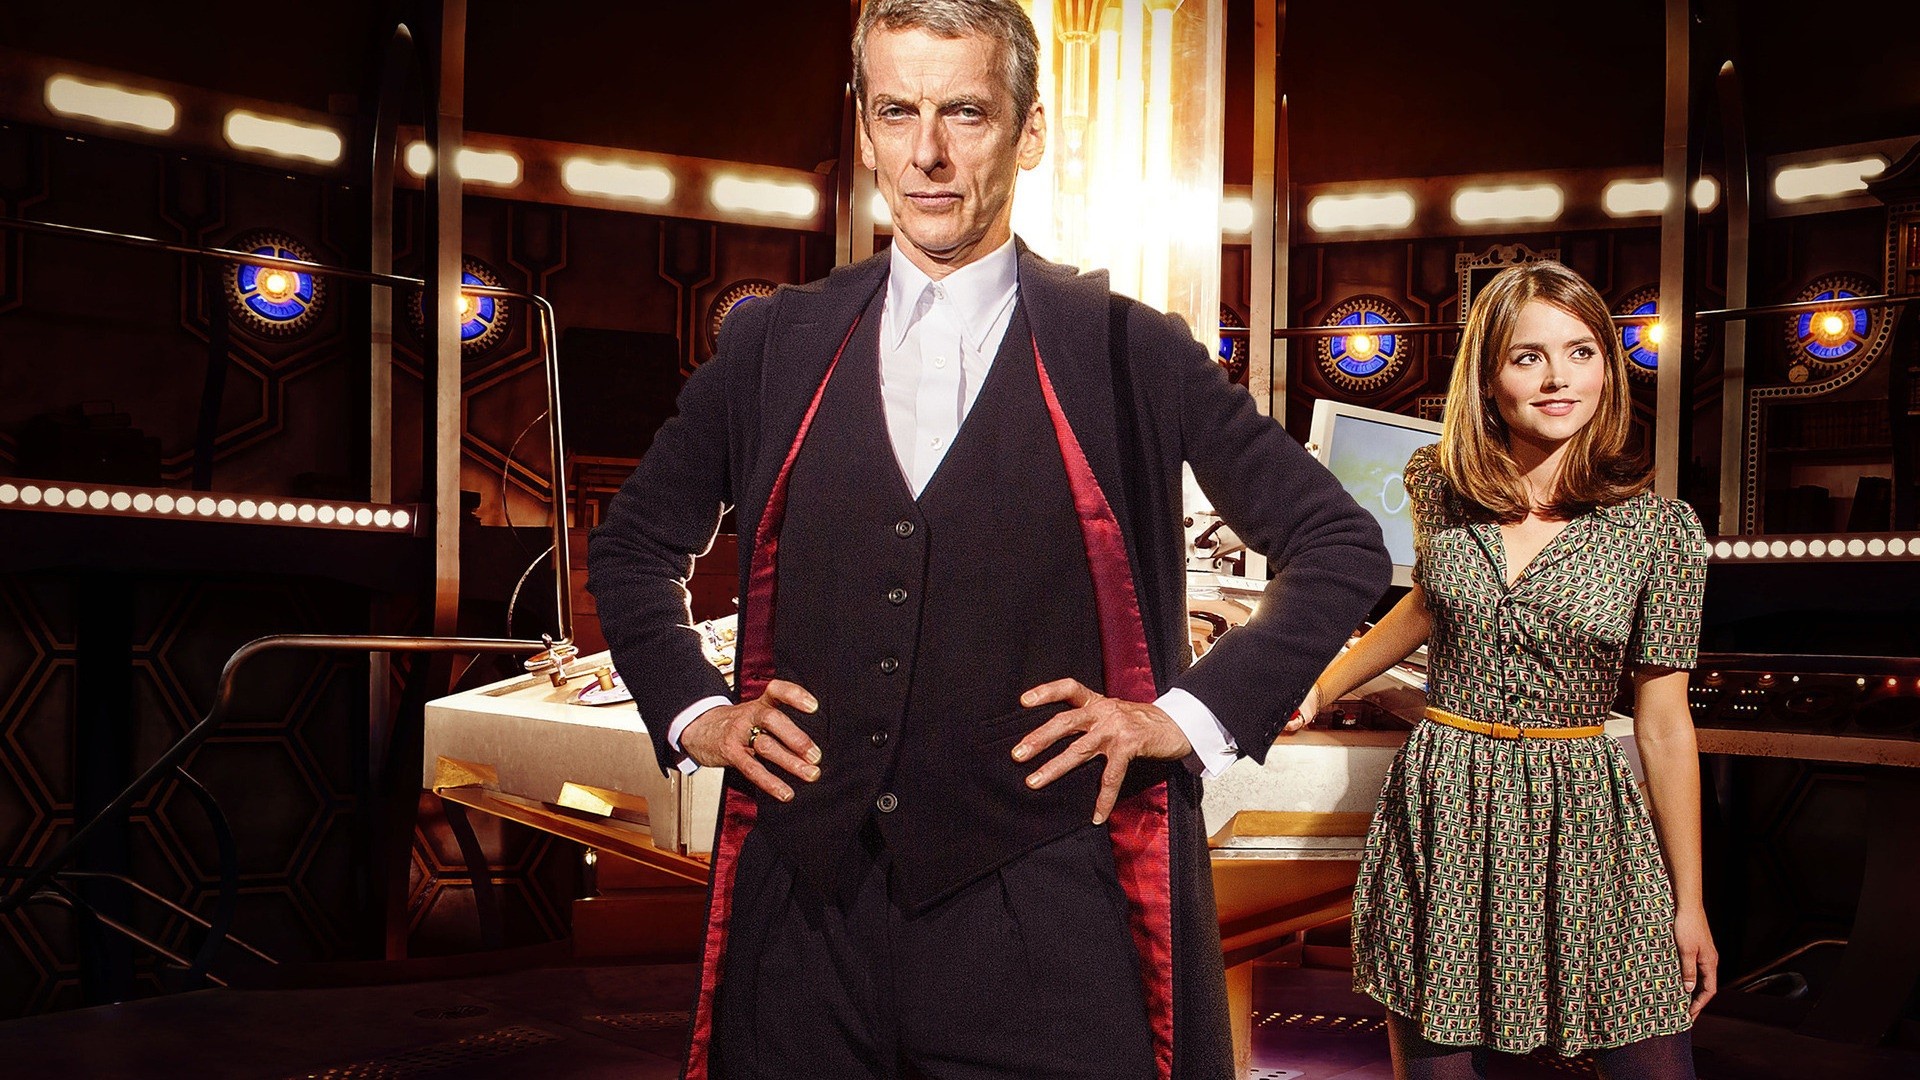 Doctor Who The Doctor TARDiS Peter Capaldi Hands On Hips Jenna Louise Coleman Clara Oswald BBC Tv Se 1920x1080